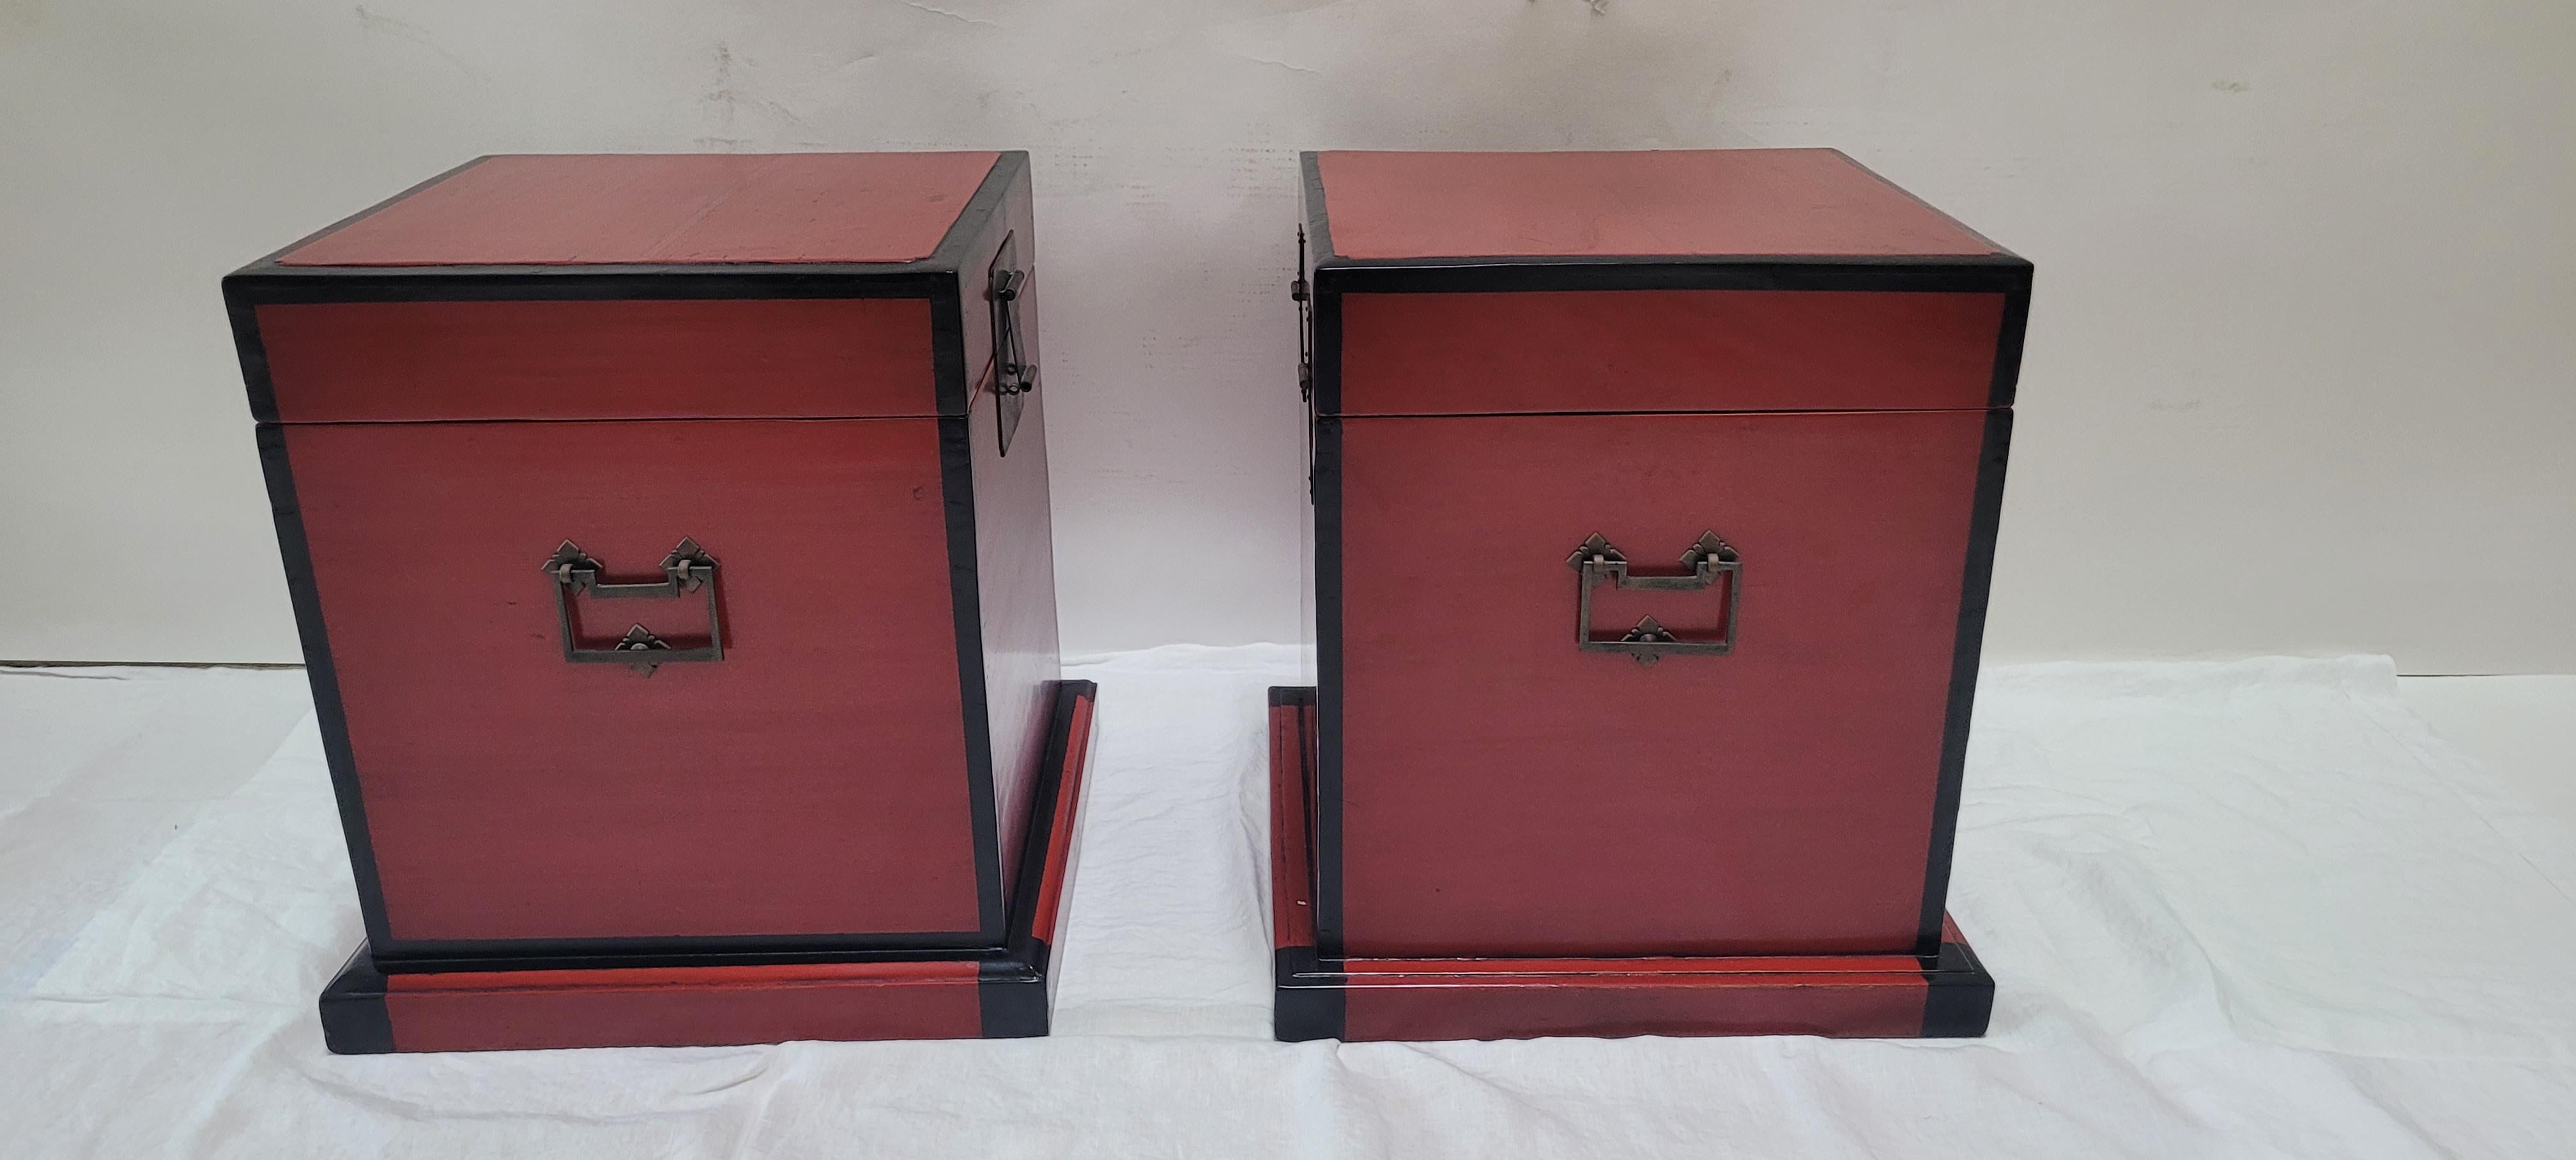 Pair of Red Lacquer Trunks - Early 20th Century In Good Condition For Sale In Santa Monica, CA